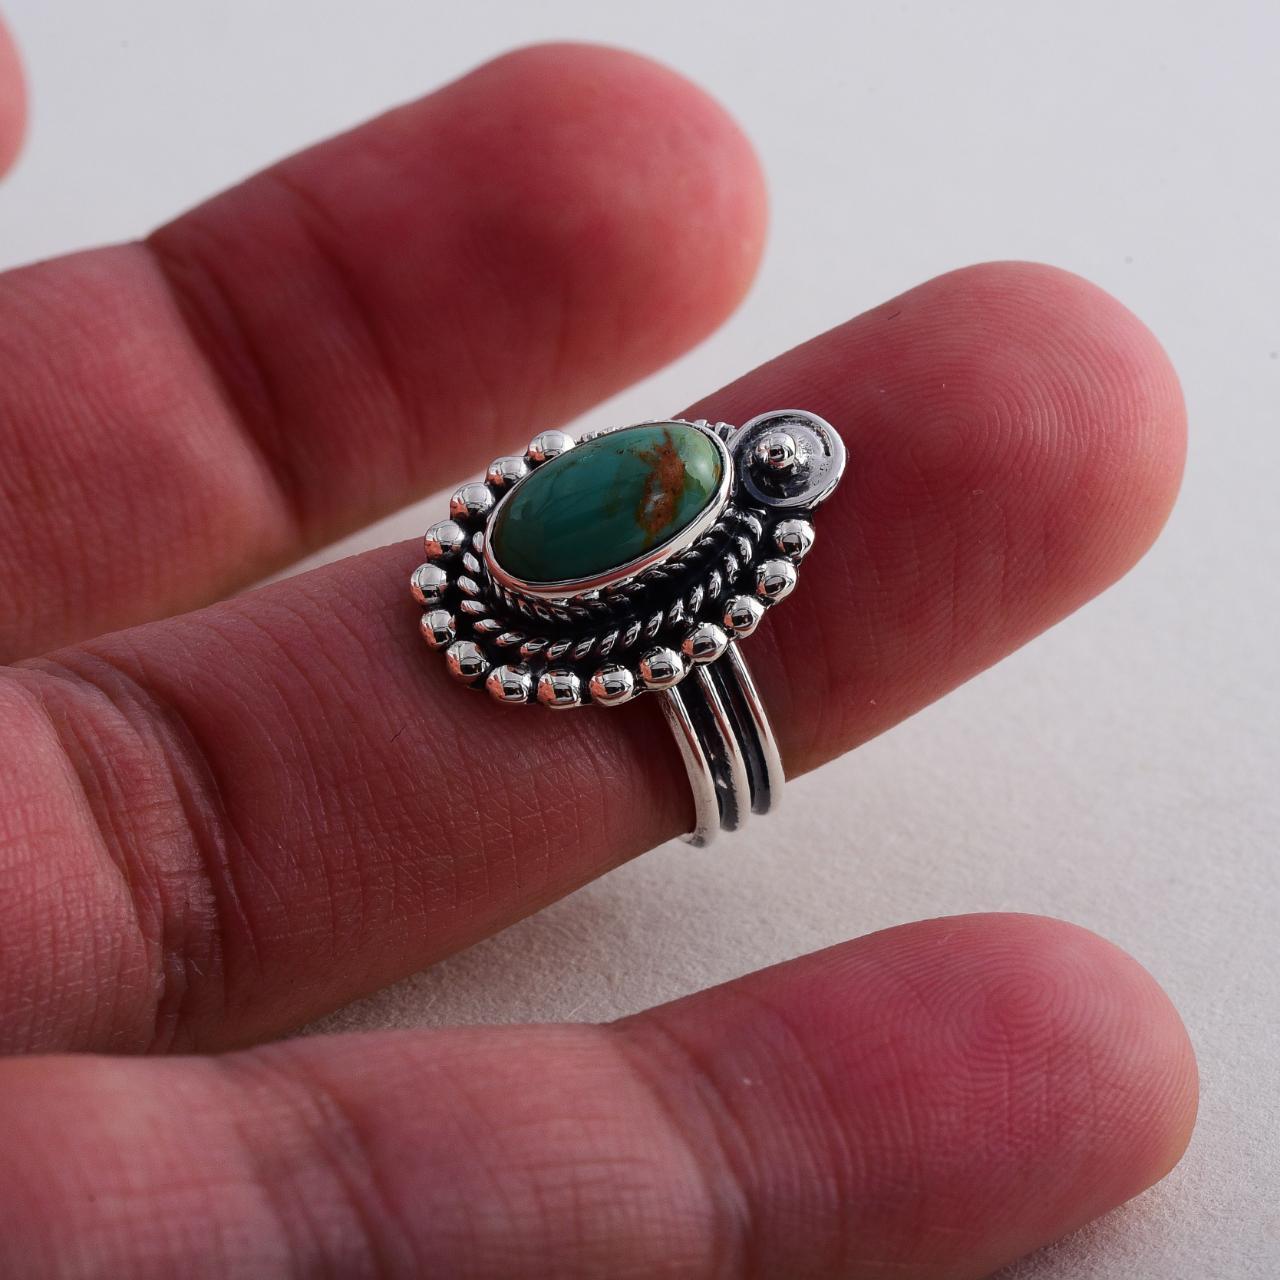 Product Image 4 - Sterling 925 Turquoise Ring

Sterling Silver

Size